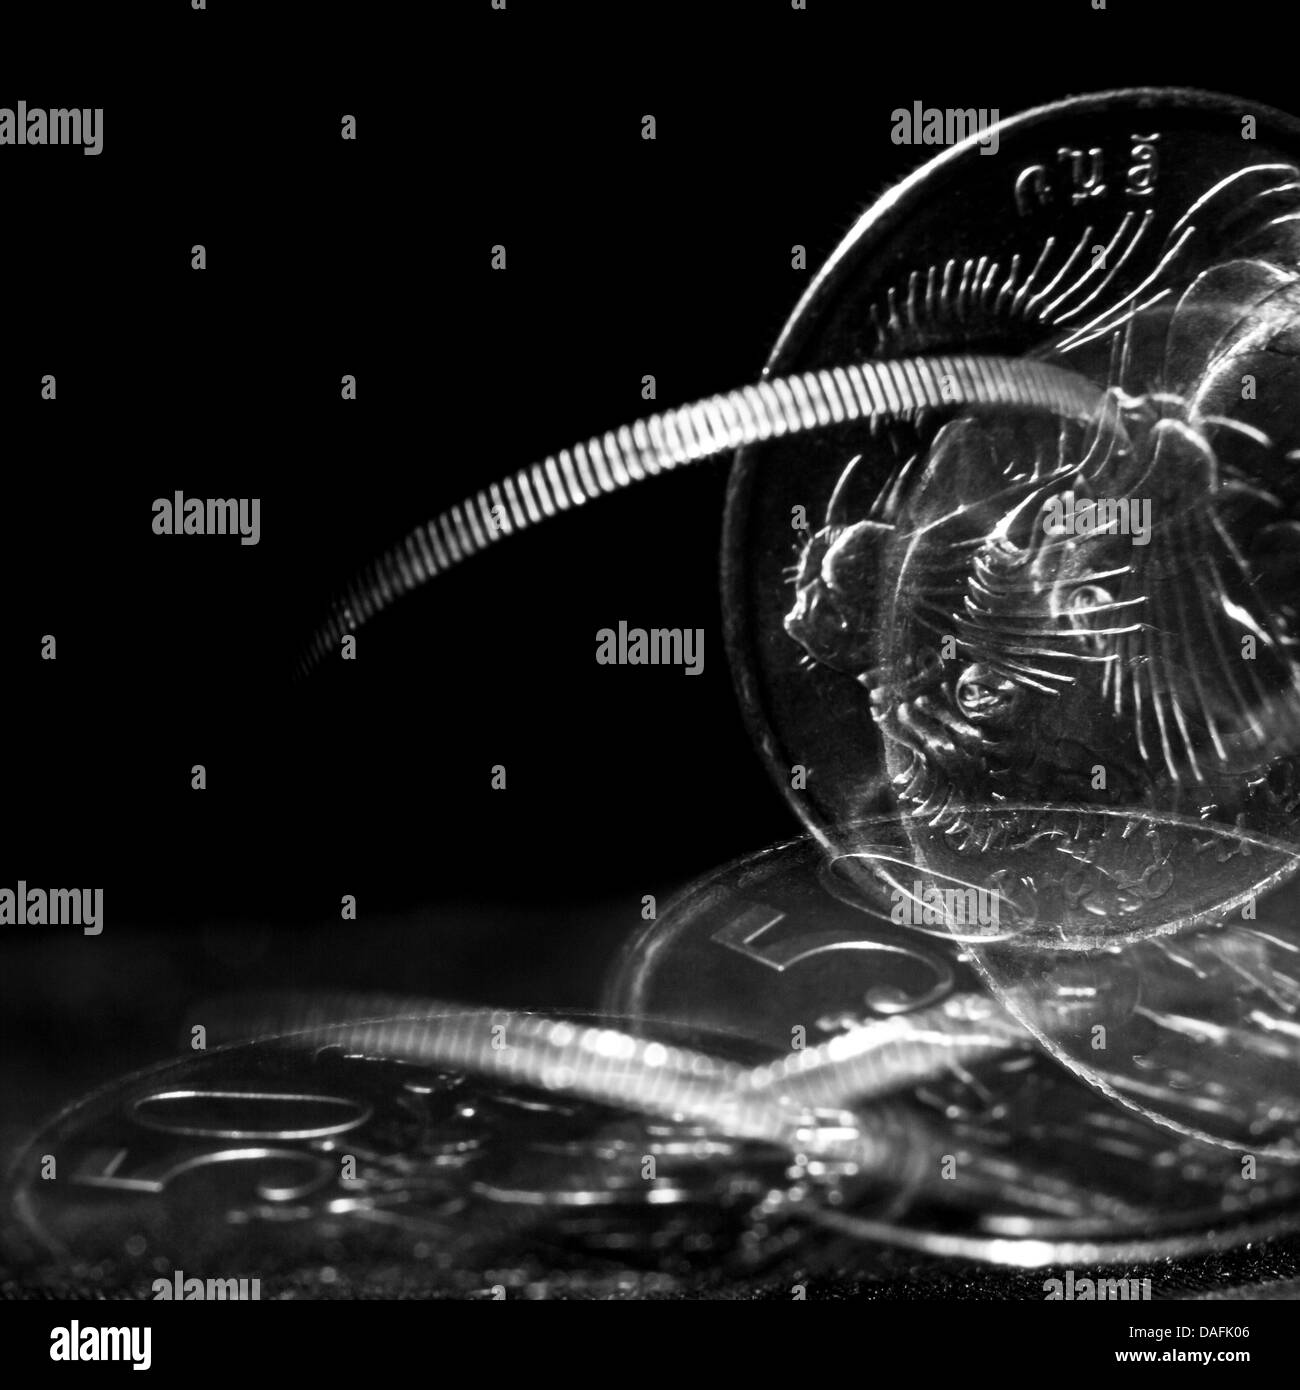 Stroboscopic effect created using flash capturing the motion of a coin as it is spinning Stock Photo